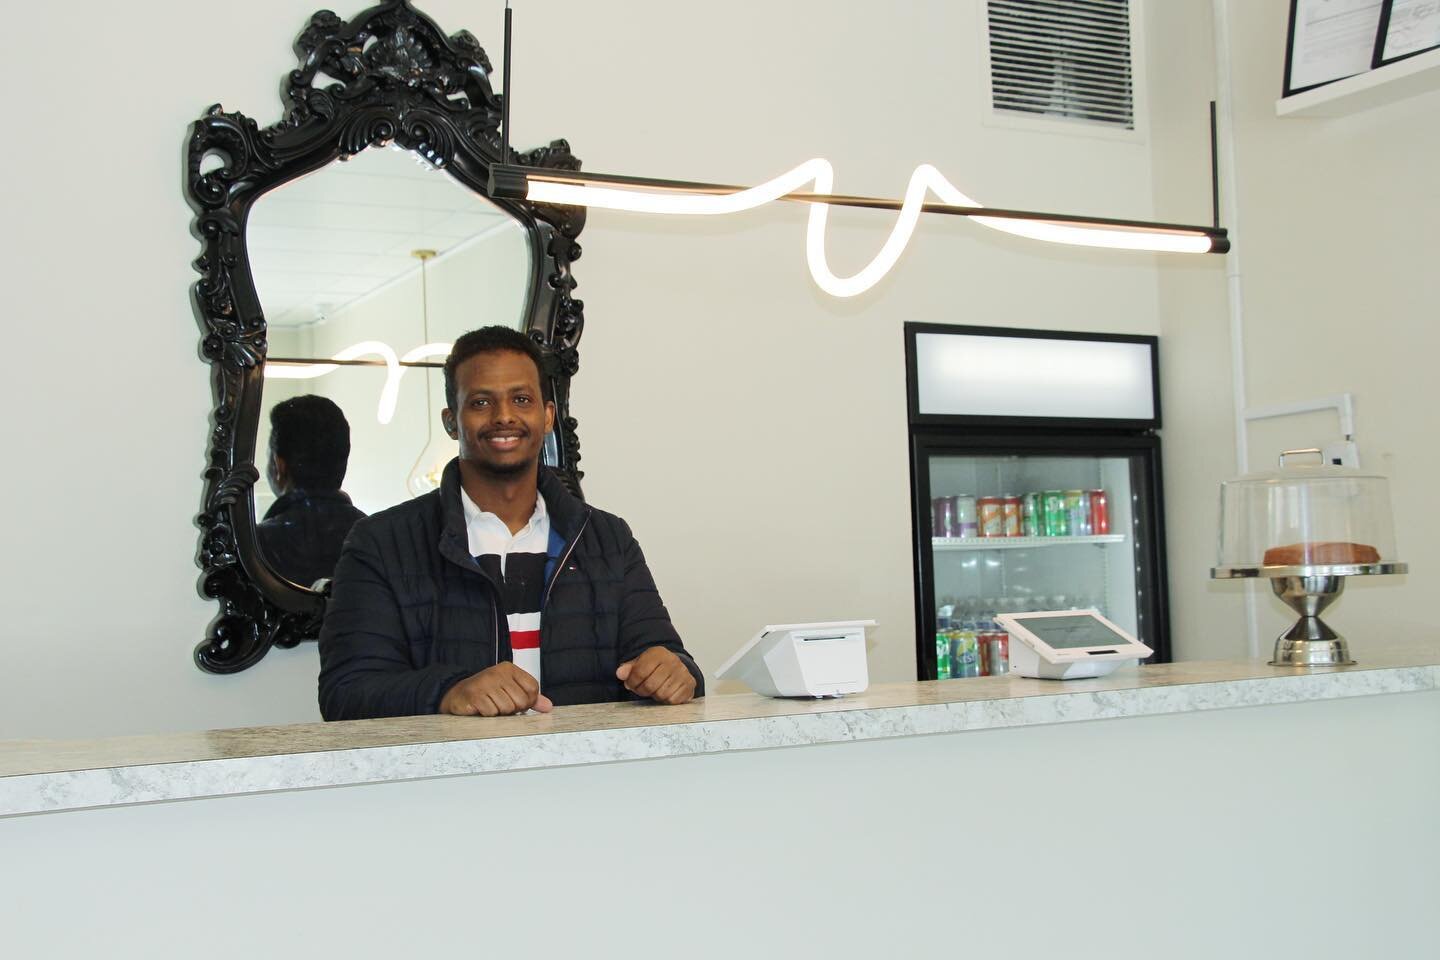 Today we are highlighting Yousef Ahmed owner of Africano Cafe located on the Avenue.

🌙While bidding farewell to the beloved Mama Asha Cafe, we&rsquo;re thrilled to announce that Africano Cafe has stepped in to fill the space. Many of Mama Asha&rsqu